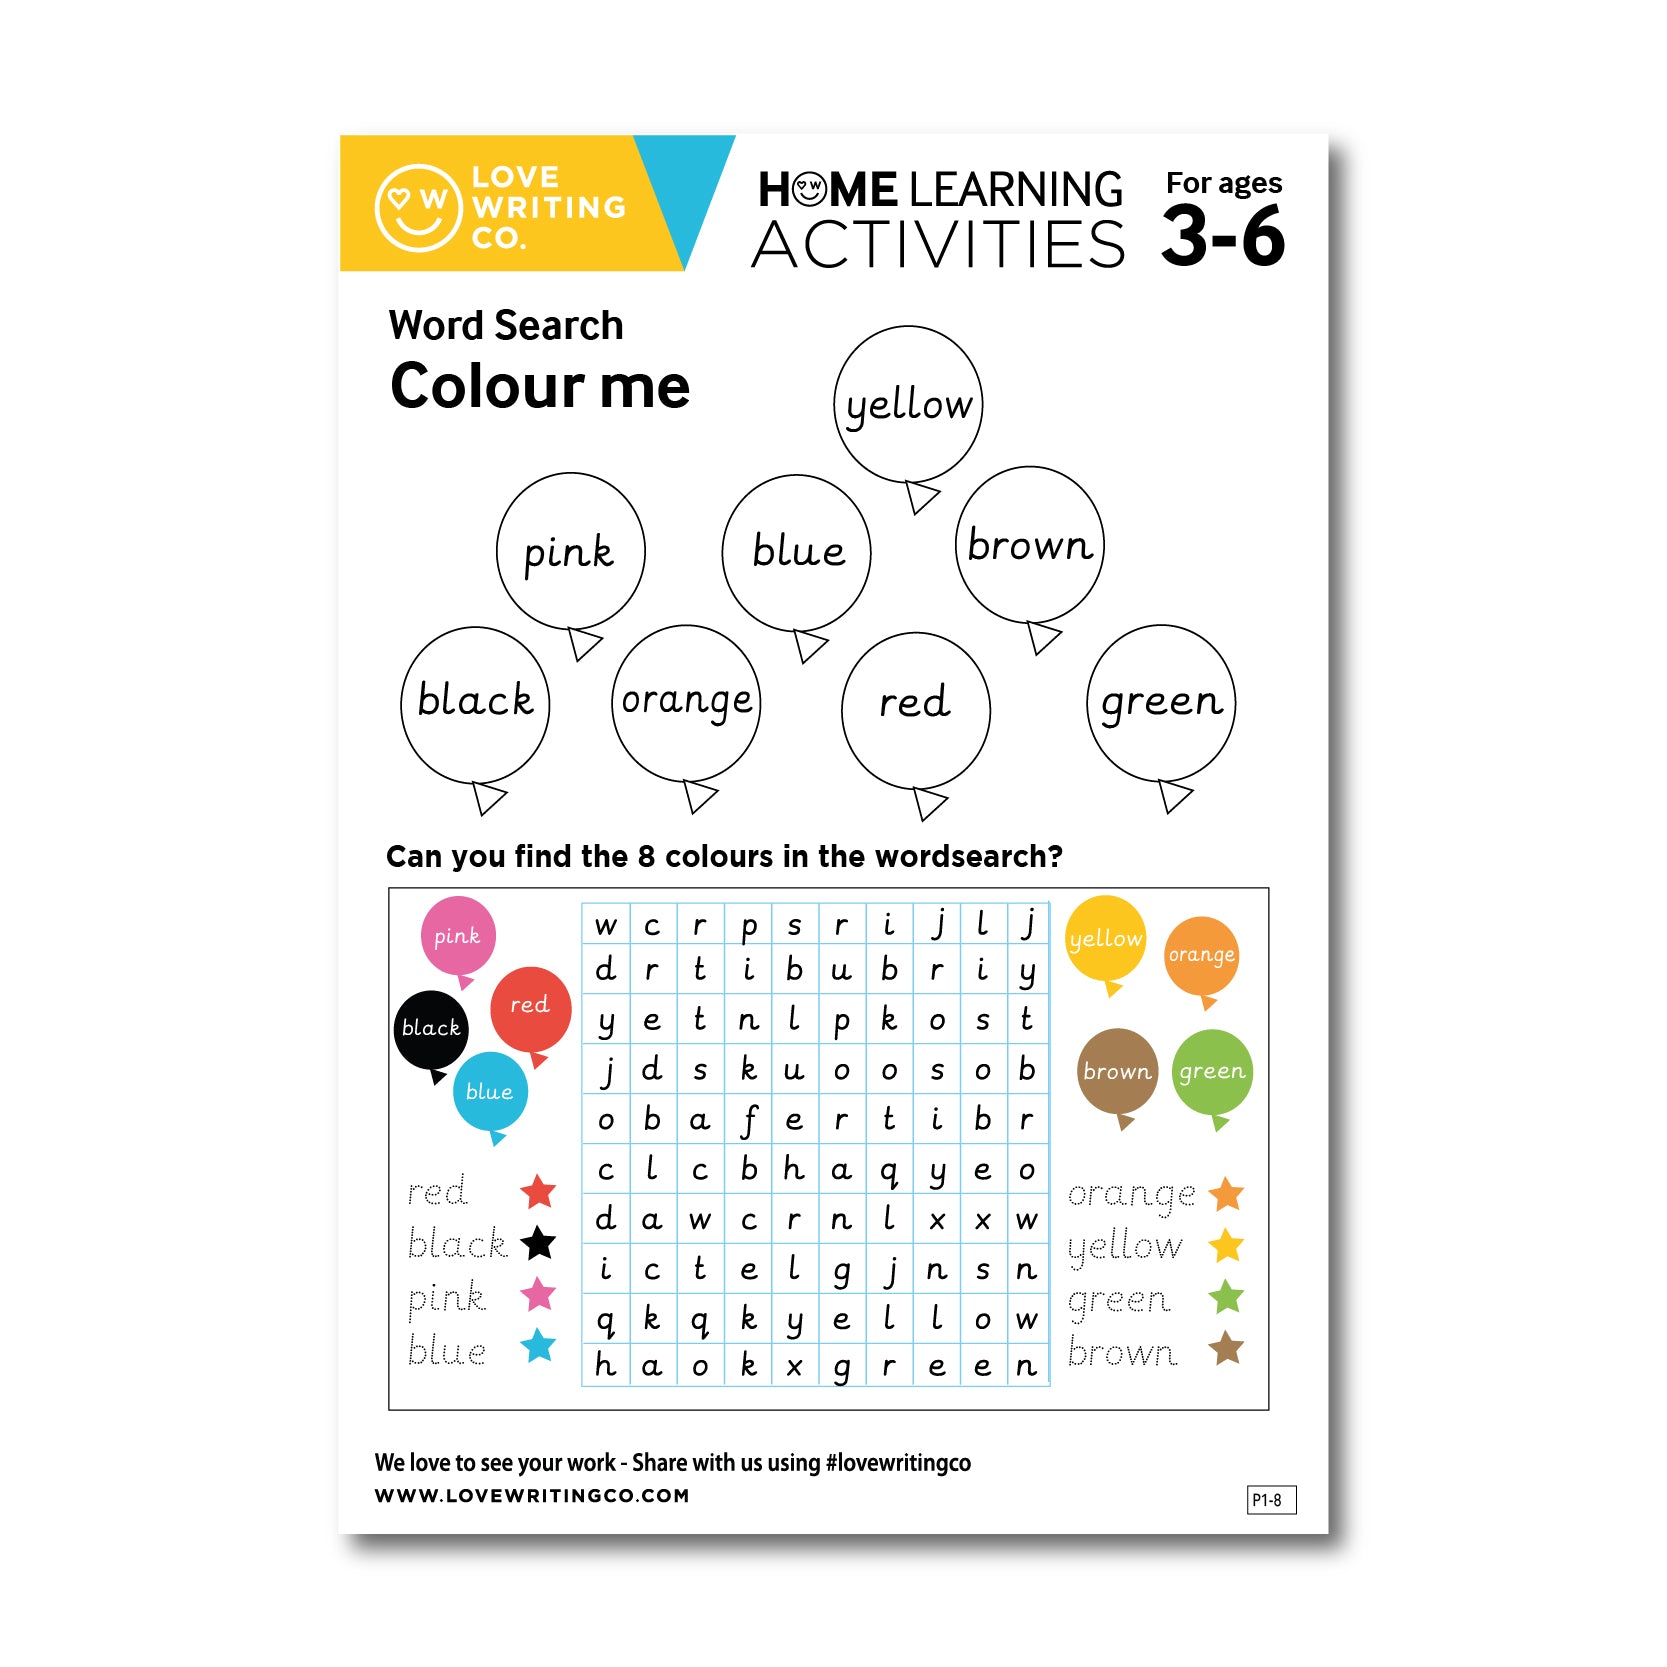 Word search activity: Colour me